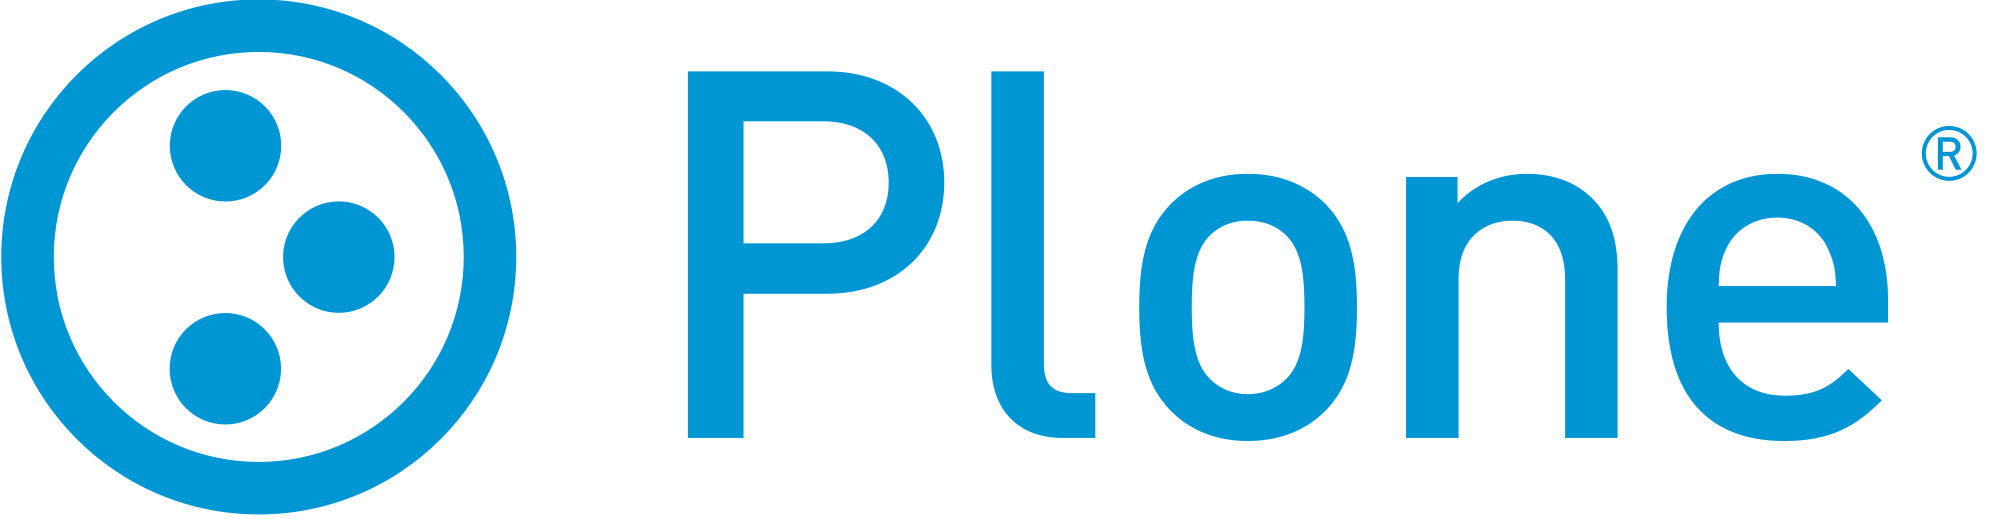 https://upload.wikimedia.org/wikipedia/commons/thumb/d/df/Plone-logo.svg/2000px-Plone-logo.svg.png